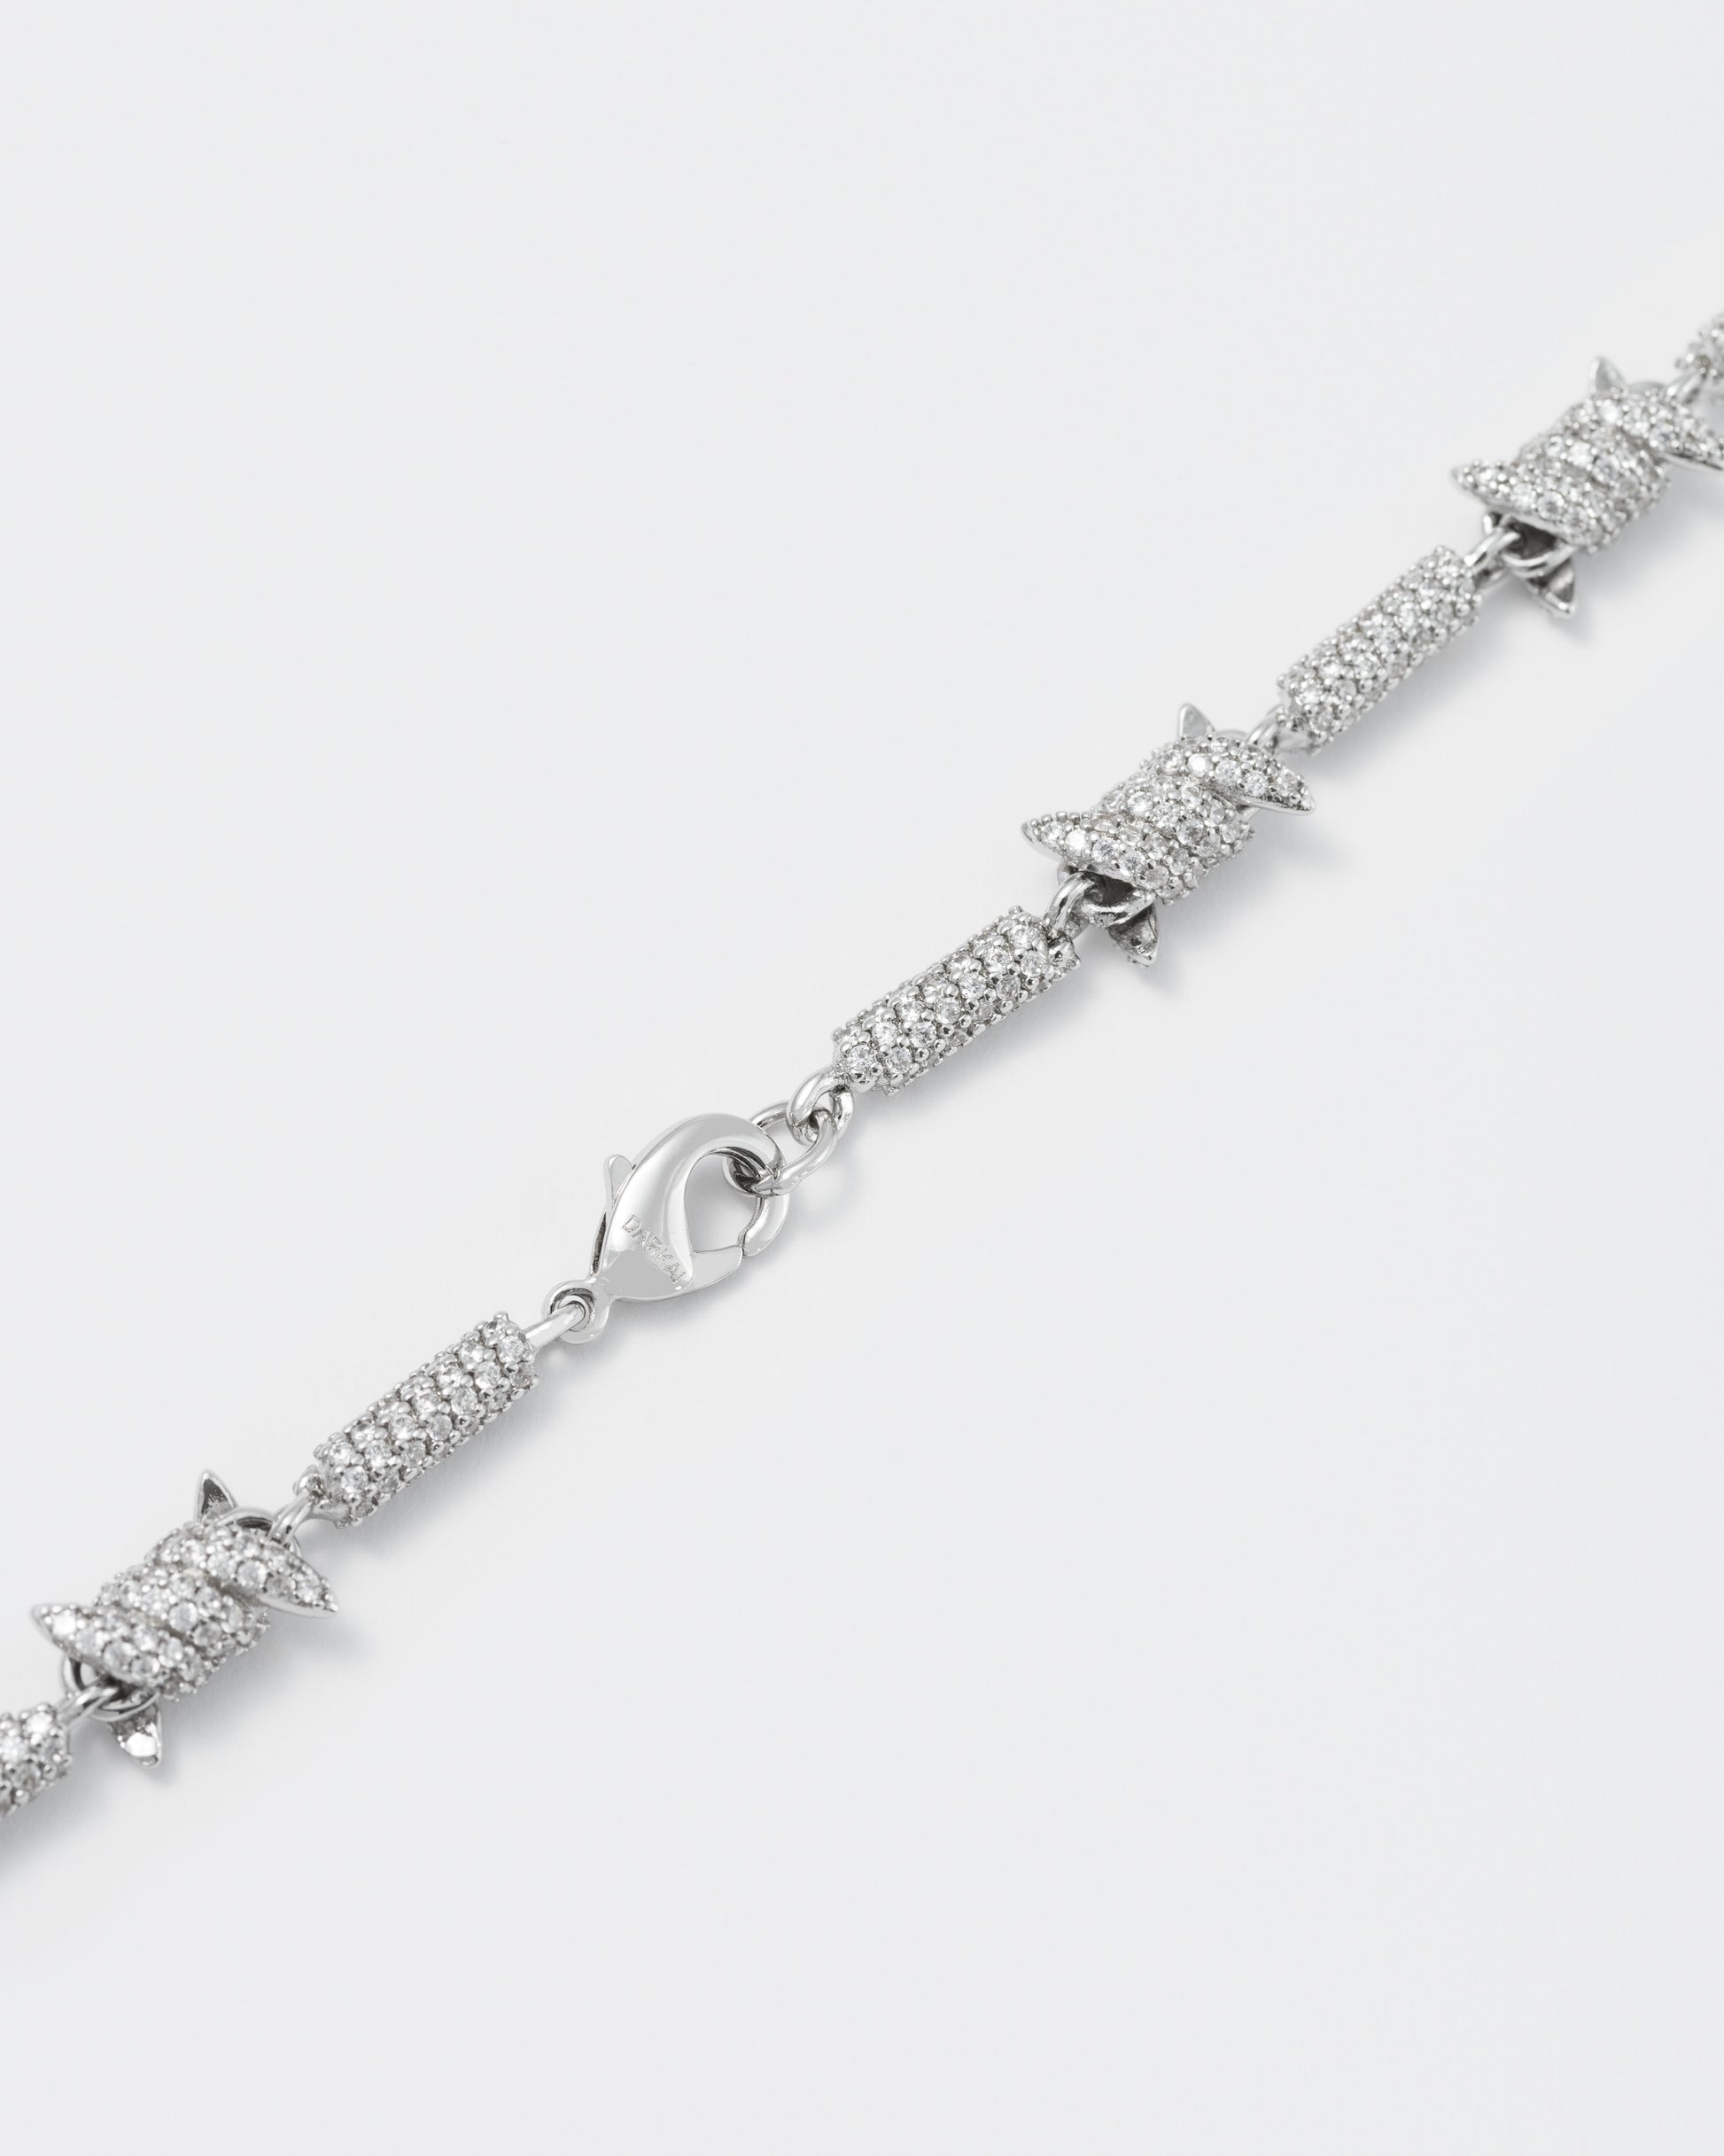 detail of barbed Wire necklace with 18kt white gold coating and hand-set micropavé stones in diamond white. Lobster clasp closure with logo